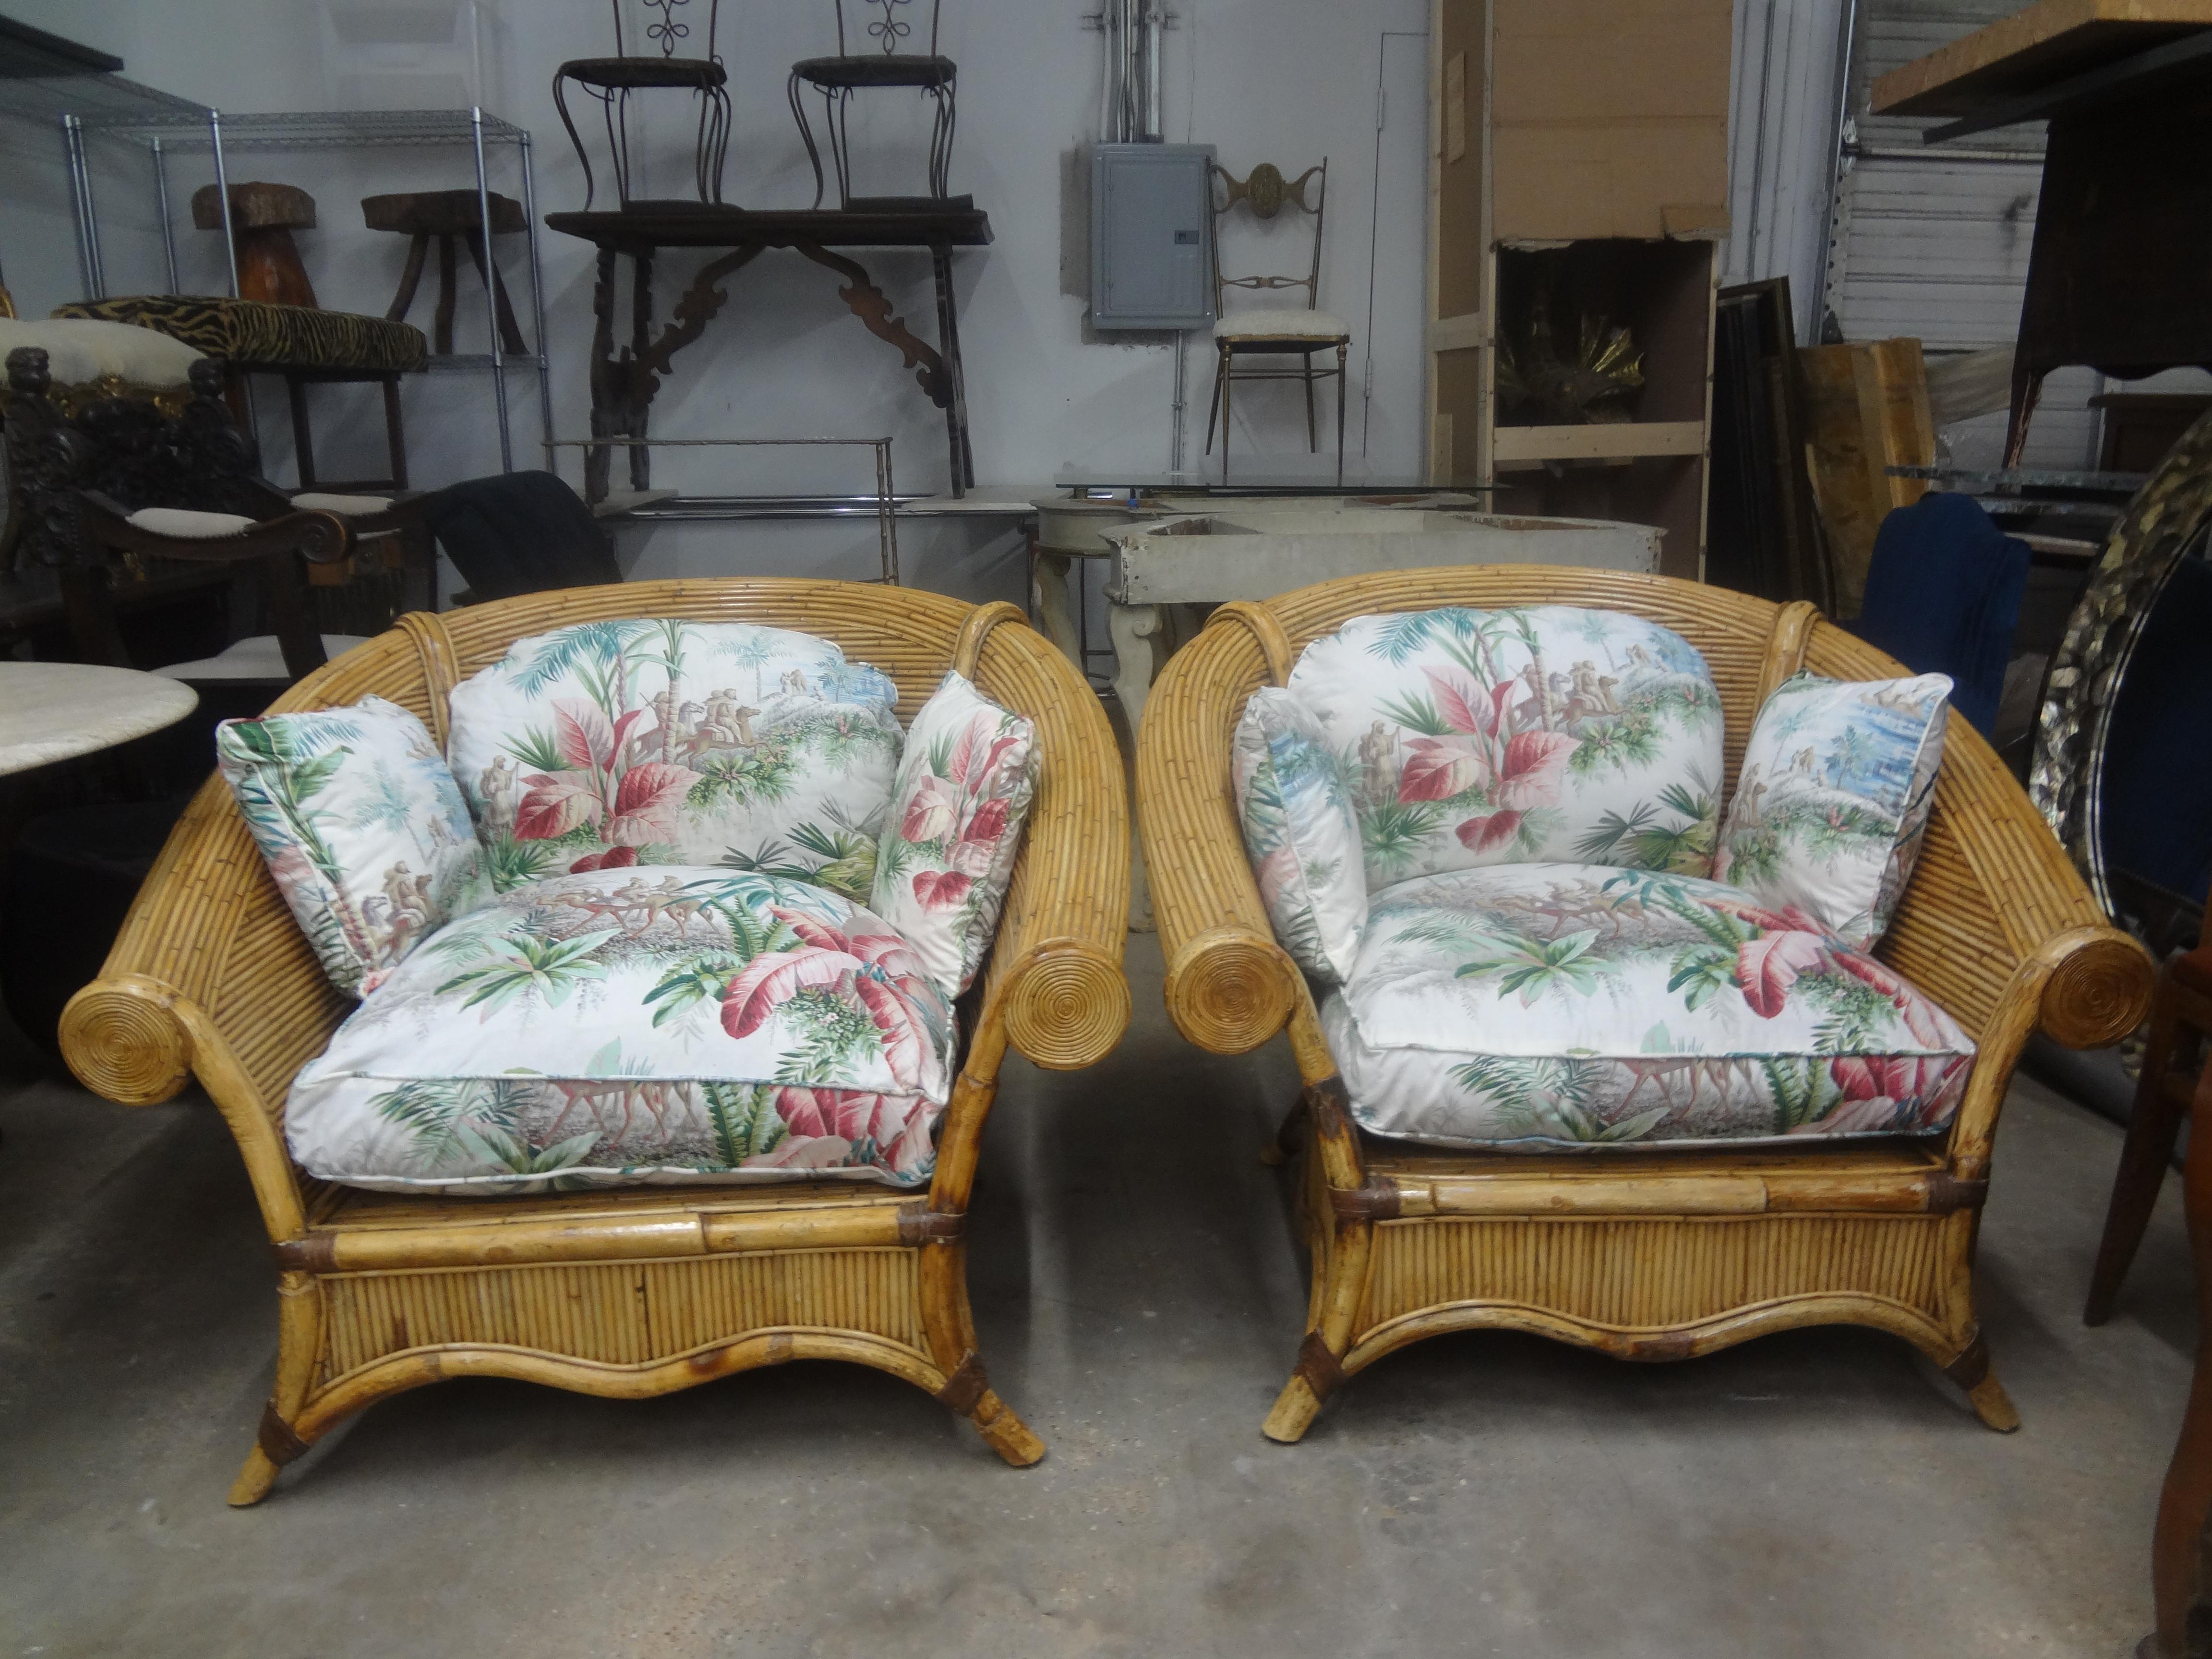 Pair Of Italian Vivai Del Sud Pencil Reed Lounge Chairs.
This large pair of Italian Organic Modern curvaceous lounge chairs are in very good vintage condition, extremely comfortable and have newly made Pierre Frey fabric cushions.
This pair of